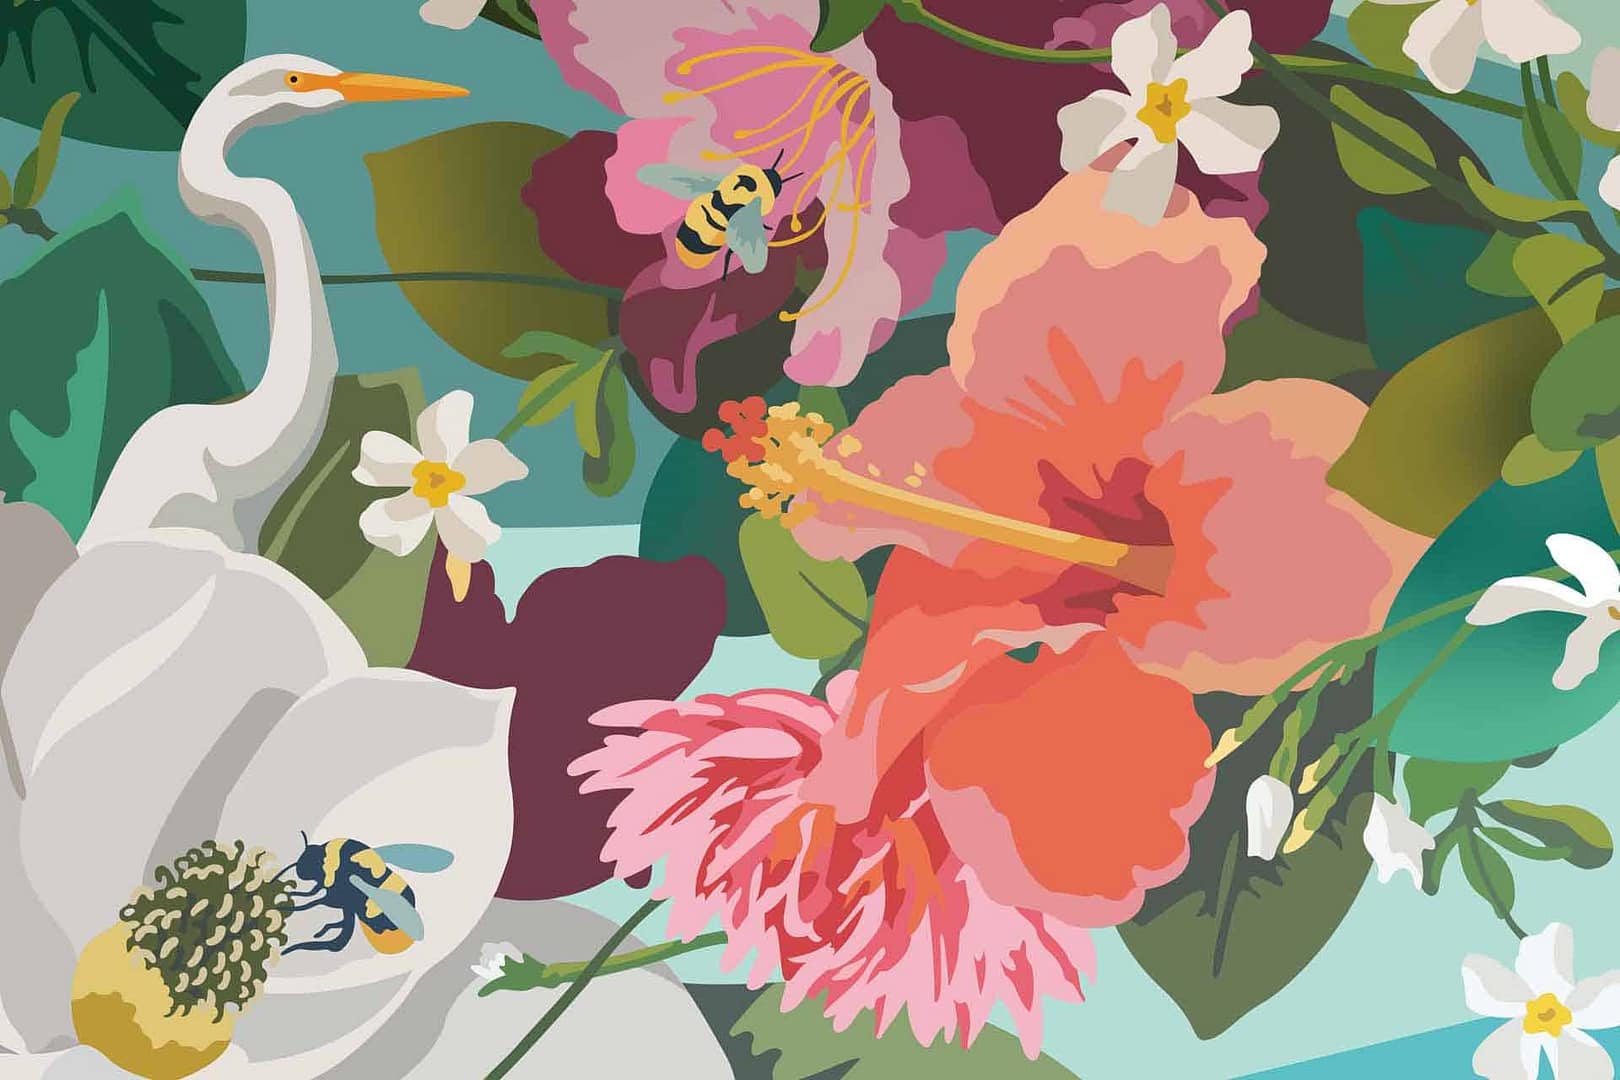 Baxly - a CS&Co wallpaper by artist Kipper Millsap, a colourful graphic wallpaper made up of tropical flowers, insects and a stork